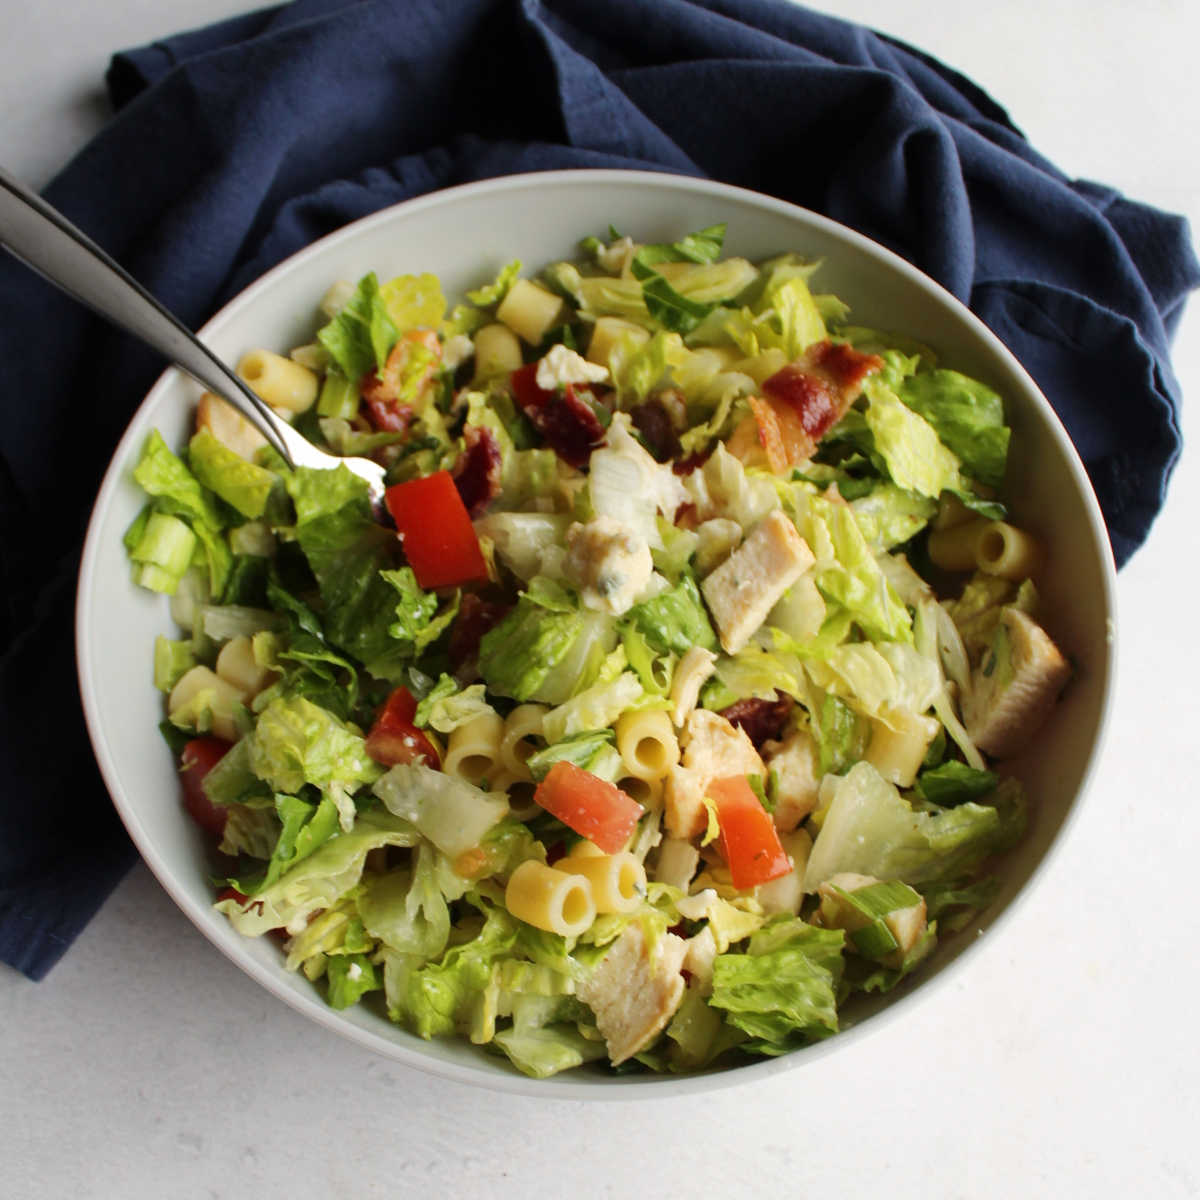 Bowl of portillo's style chopped salad with lettuce, pasta, bacon, tomatoes, chicken, cheese and more.